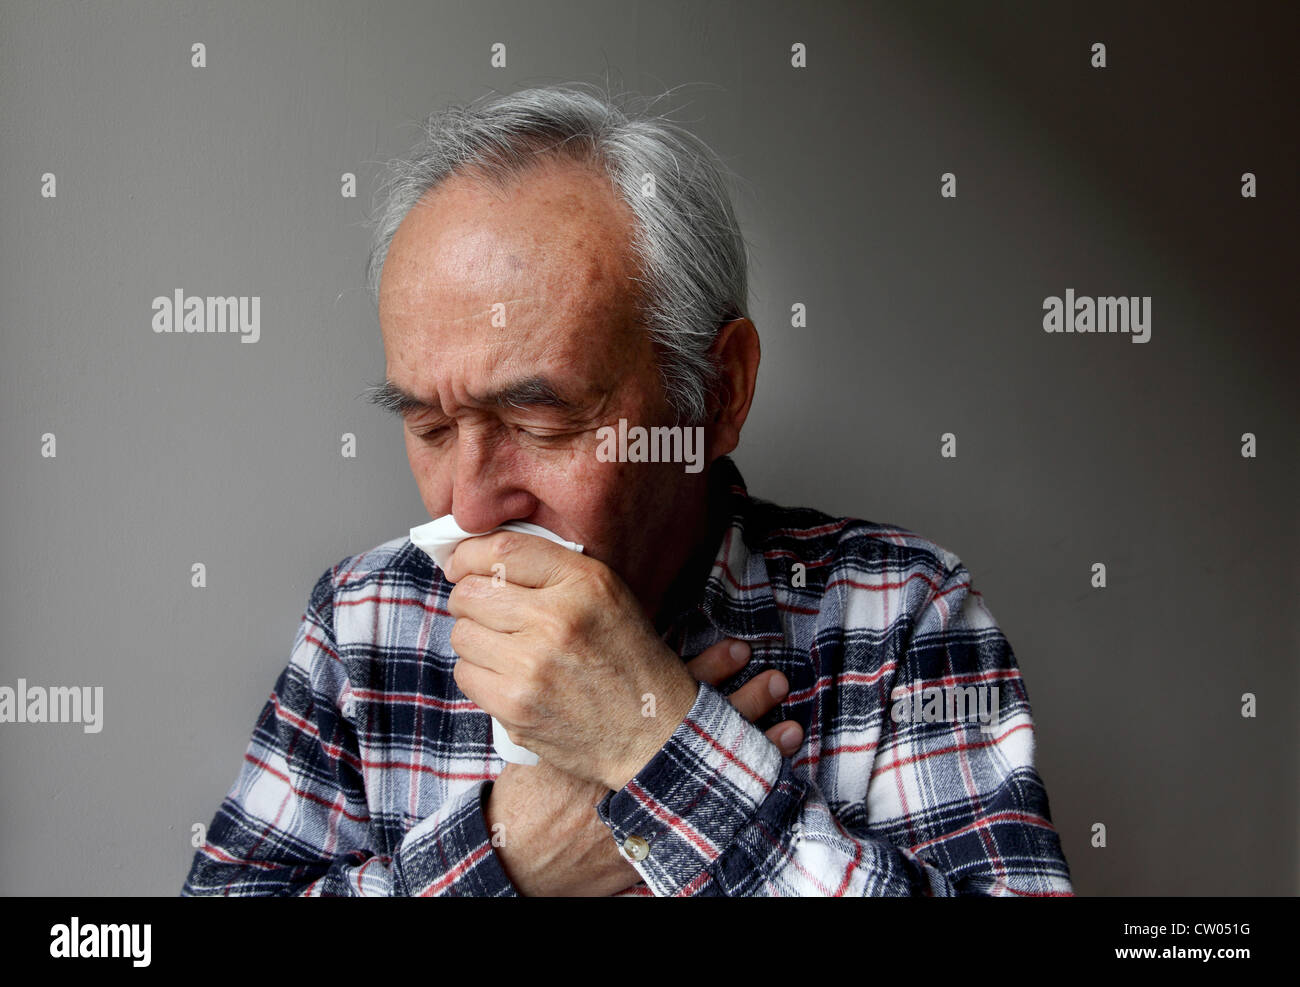 Older man coughing into napkin Stock Photo